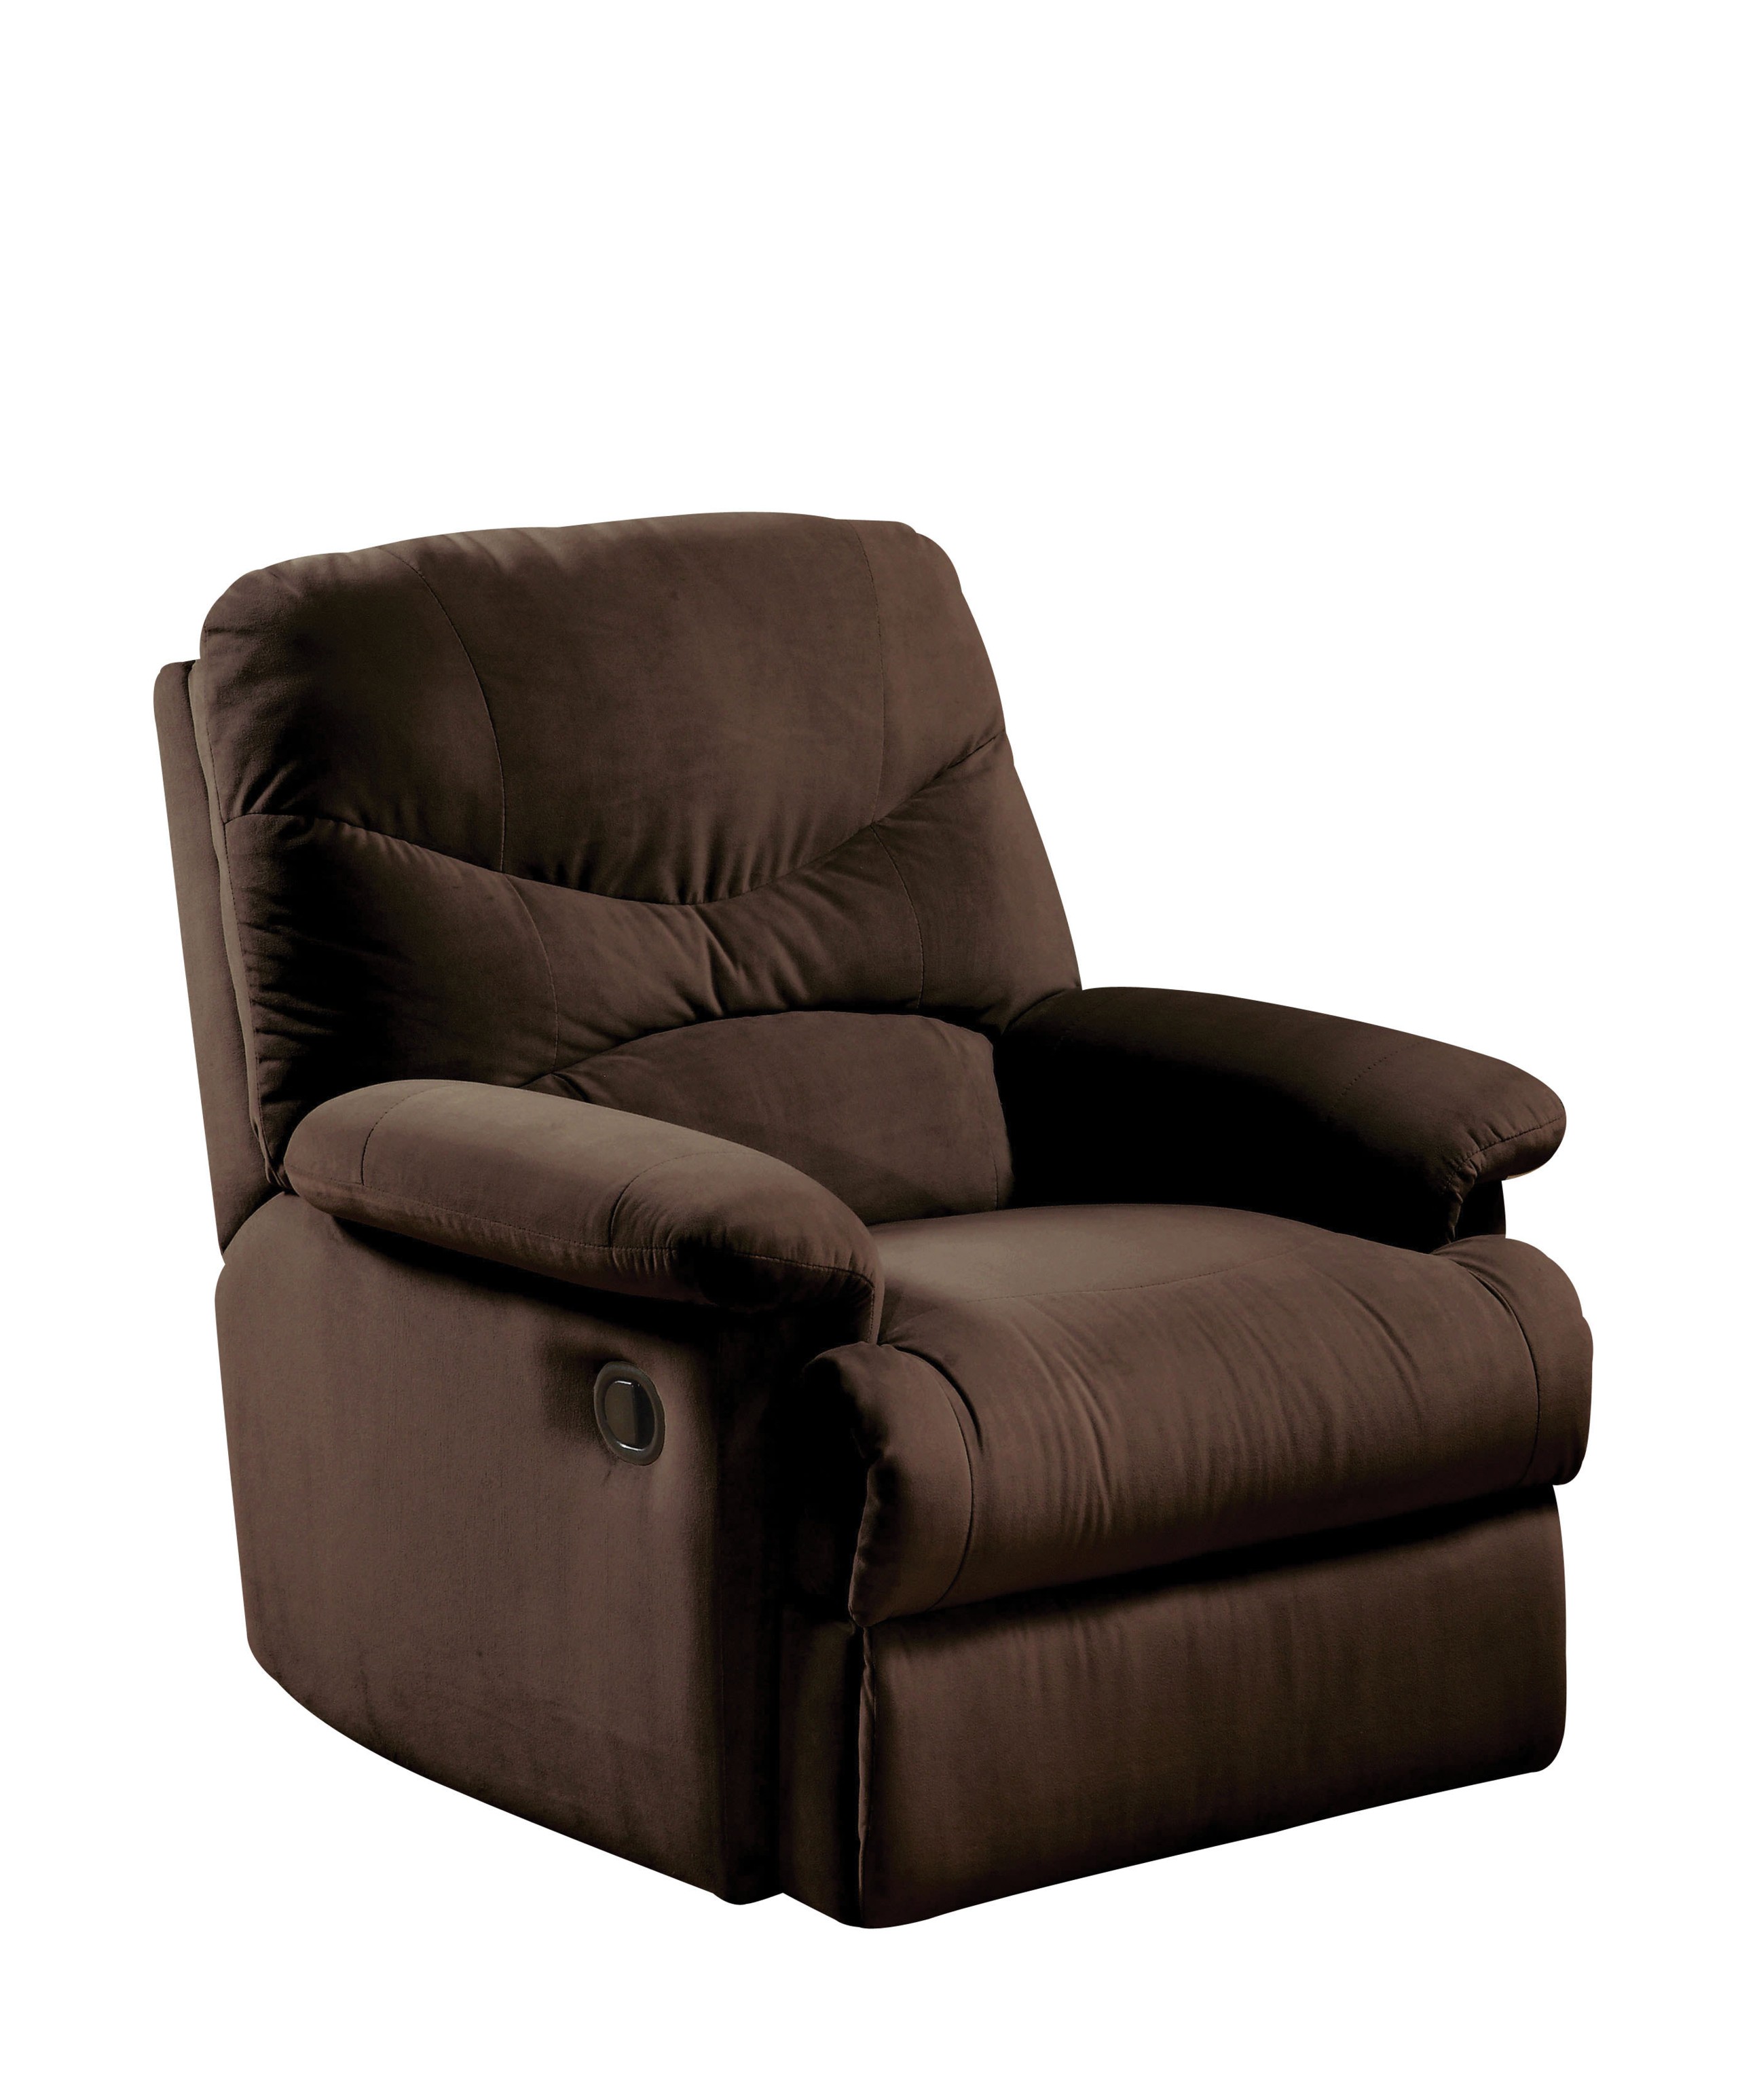 Small fabric recliners